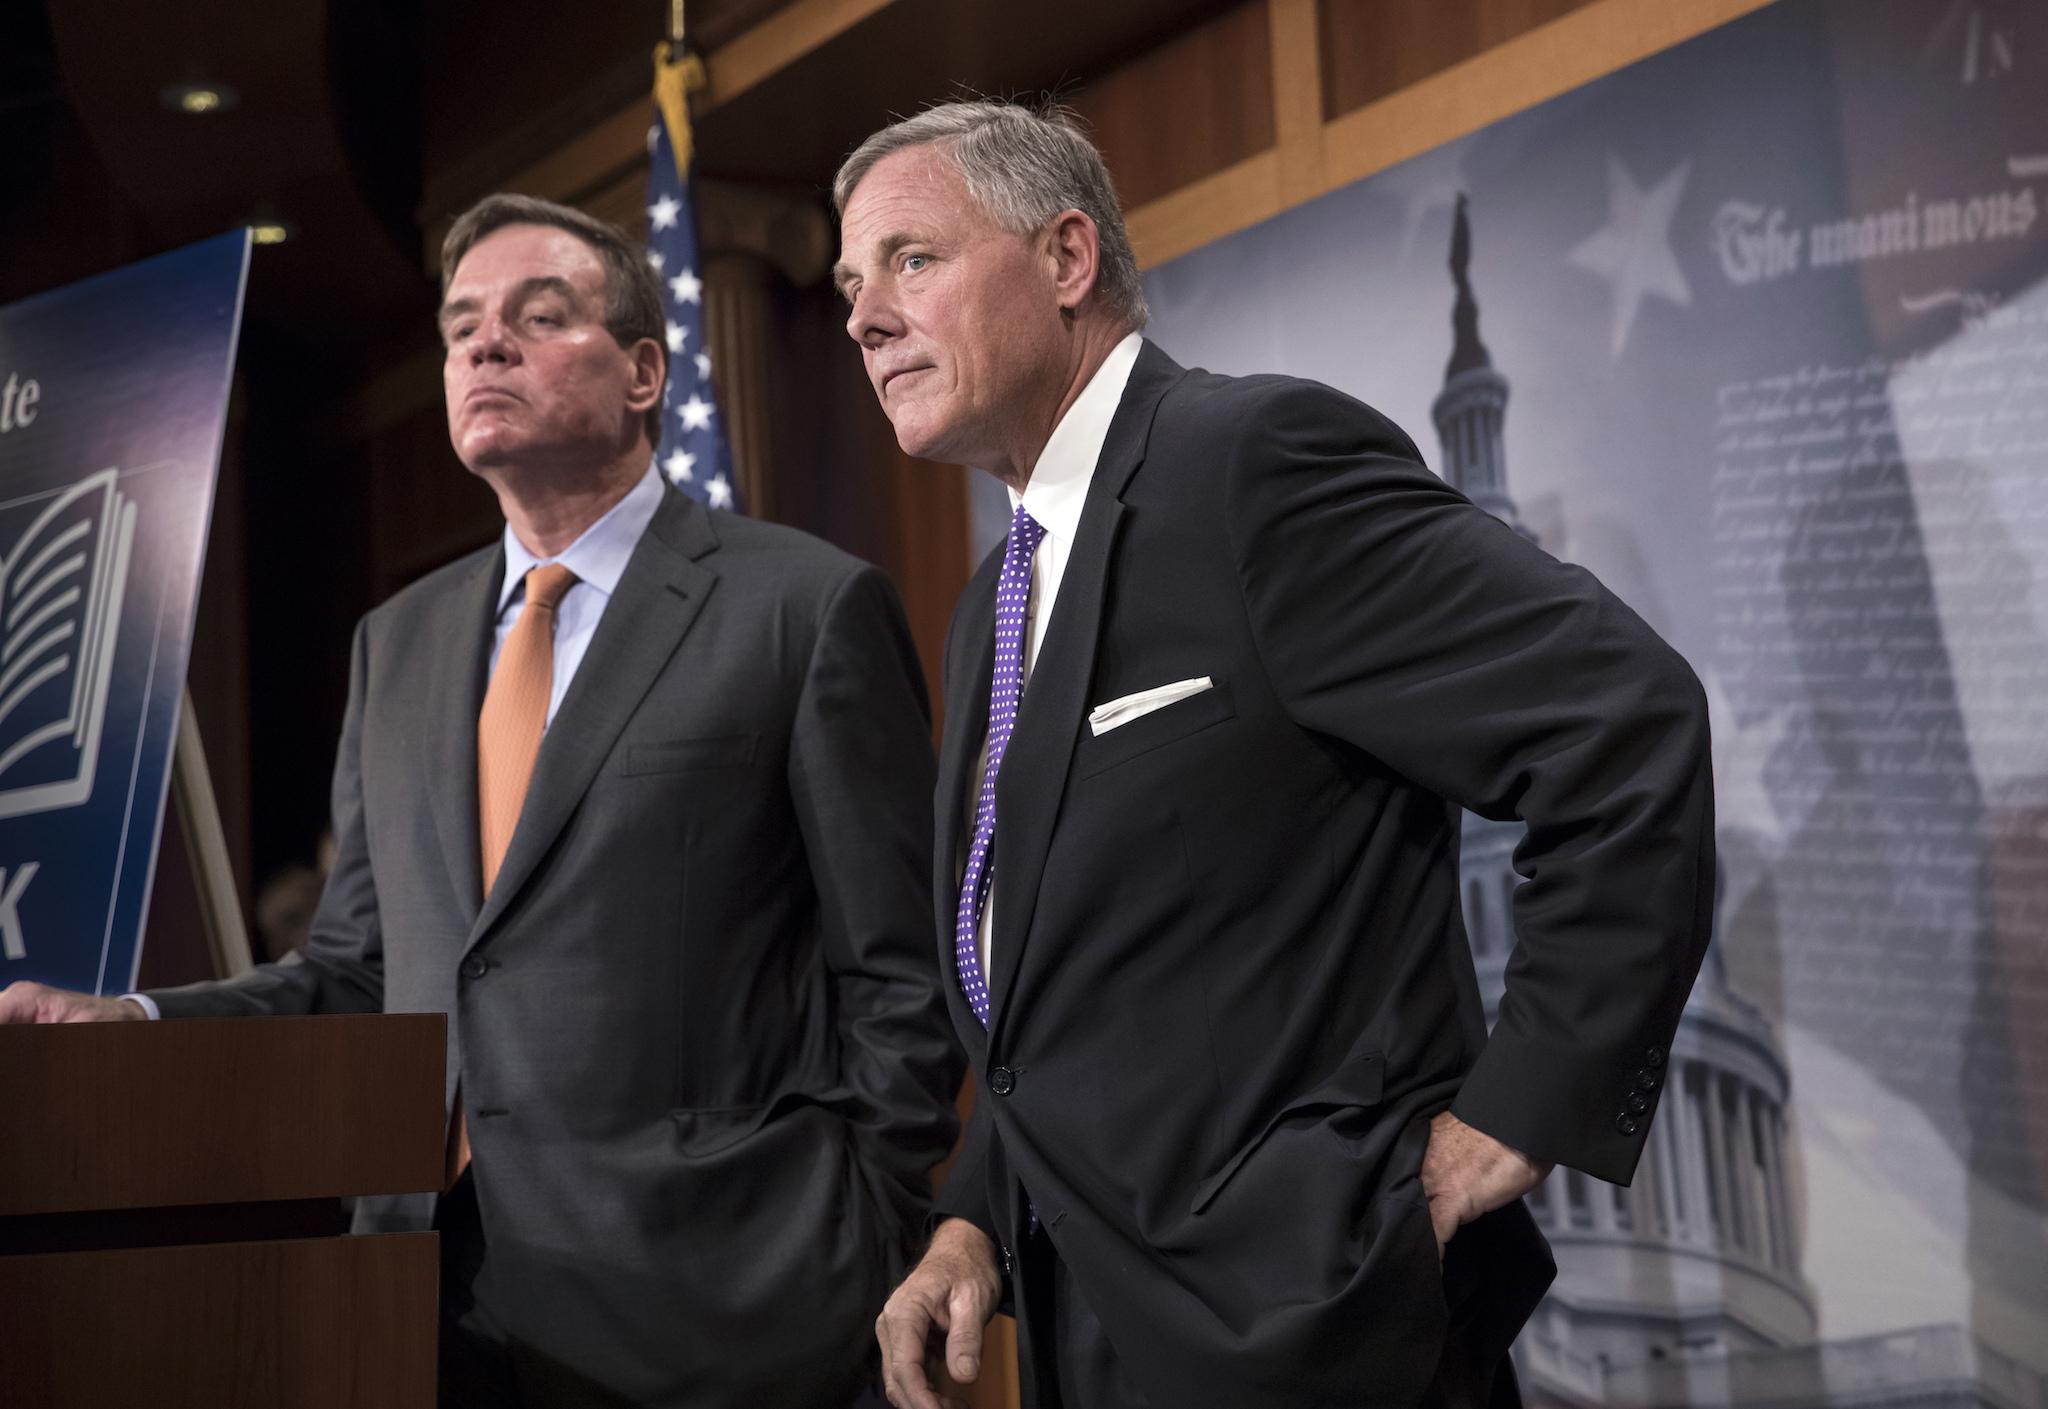 Senate Select Committee on Intelligence Chairman Richard Burr and Vice Chairman Mark Warner update reporters on the status of their inquiry into Russian interference in the 2016 US election